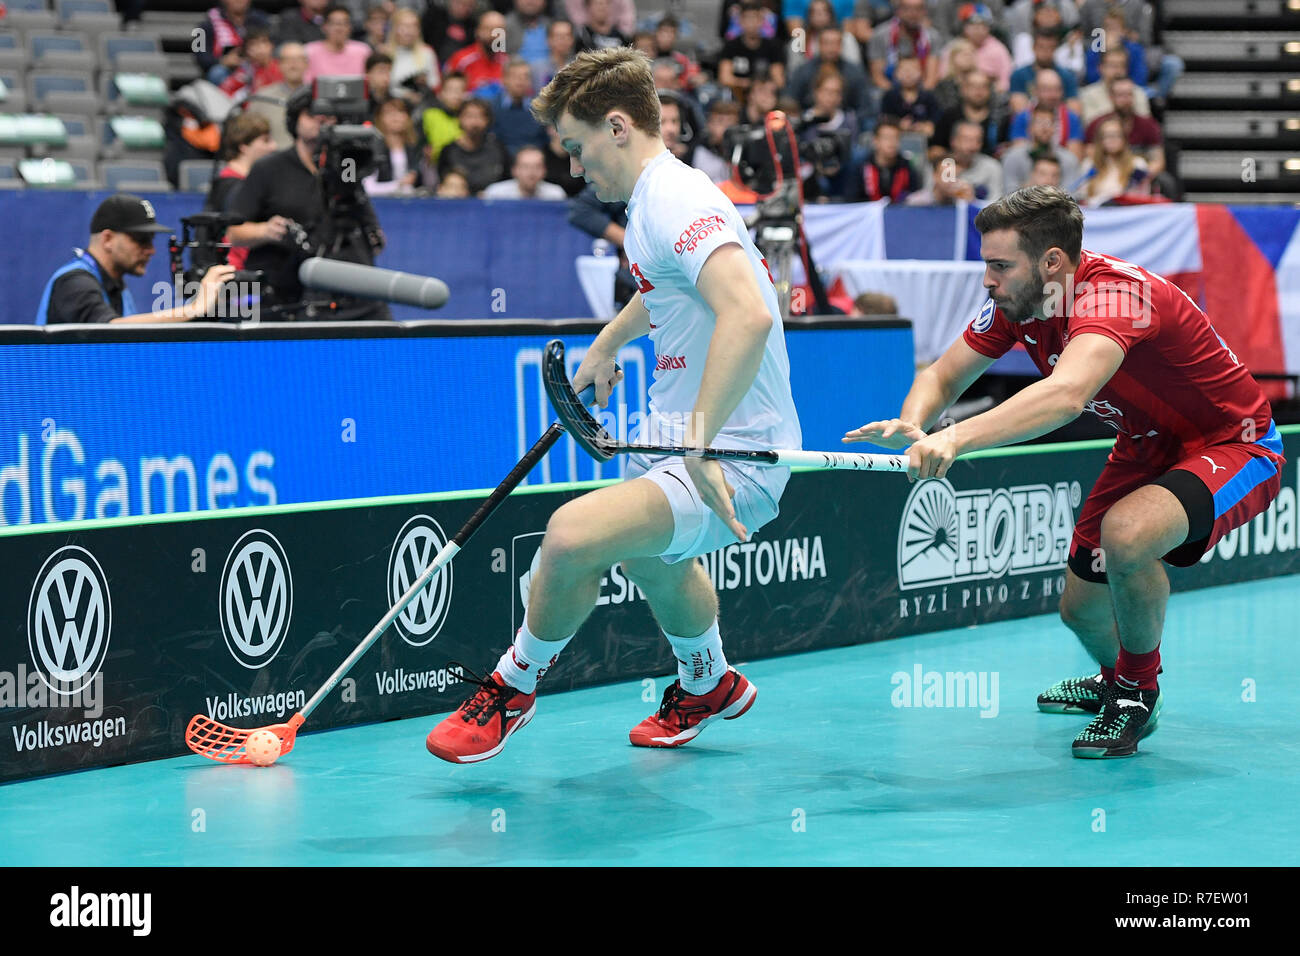 Prague, Czech Republic. 09th Dec, 2018. L-R Jan Burki (SUI) and Tom Ondrusek (CZE) in action during the Men's World Floorball Championships match for third place Czech Republic vs Switzerland, played in Prague, Czech Republic, on December 9, 2018. Credit: Ondrej Deml/CTK Photo/Alamy Live News Stock Photo